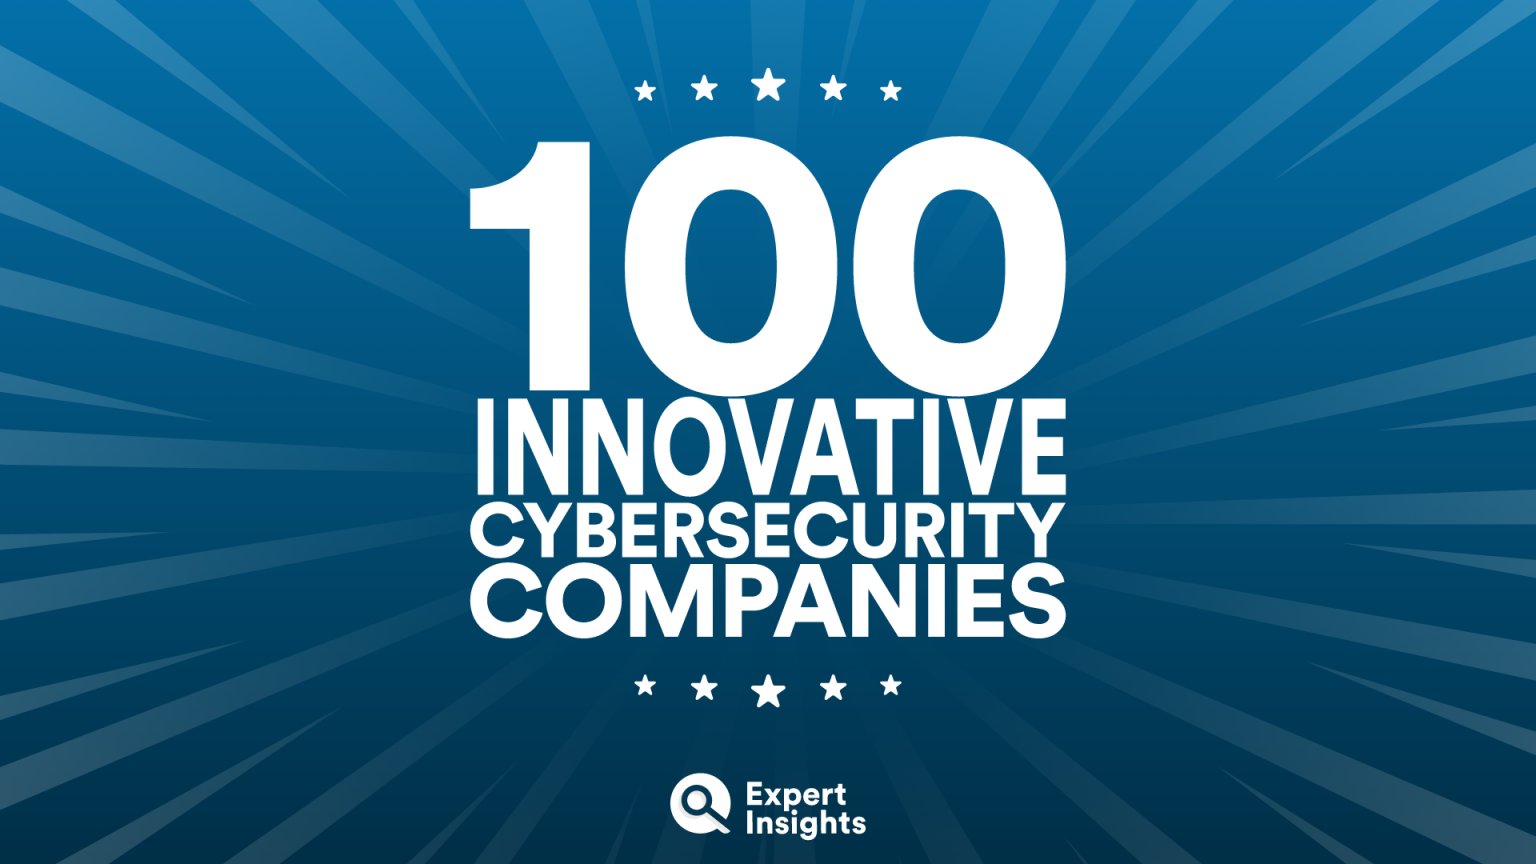 Plymouth Science Park cybersecurity review site Expert Insights announces most innovative awards for 2022